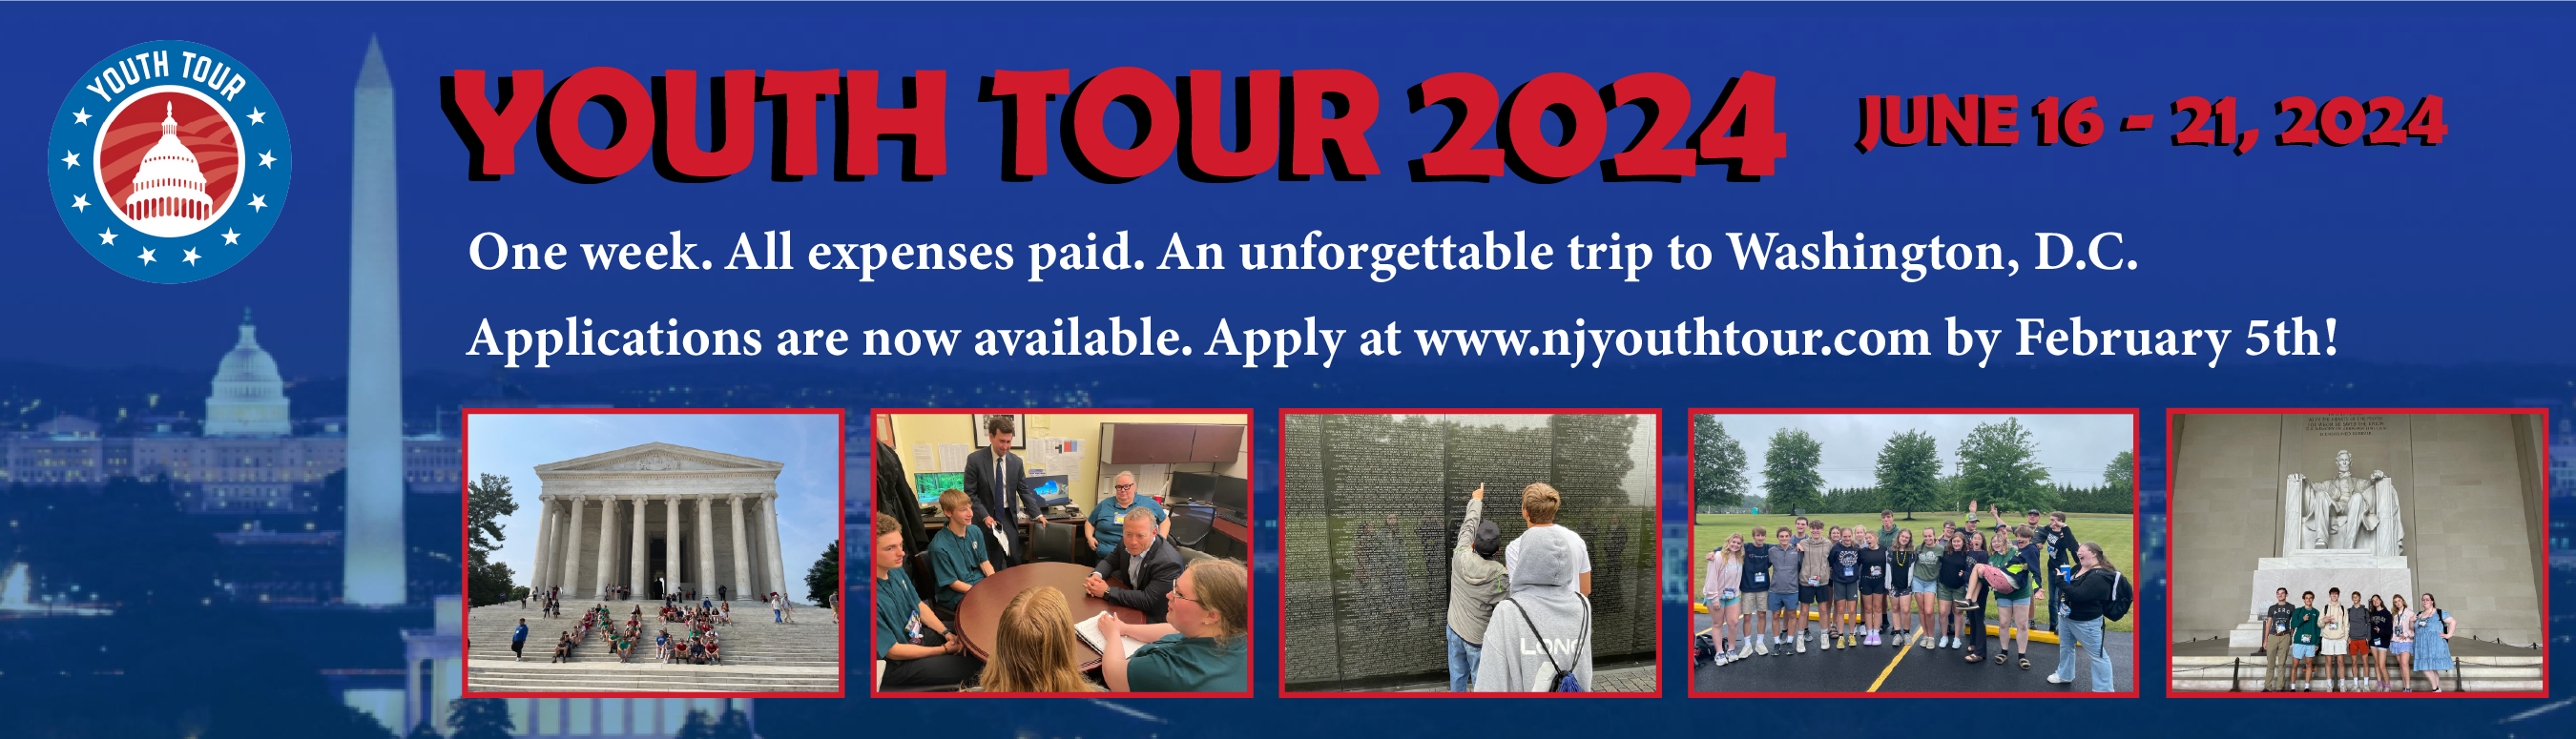 Youth Tour 2024 | June 16 - 21, 2024. One week. All expenses paid. An unforgettable trip to Washington, D.C. Applications are now available. Apply at www.njyouthtour.com by February 5th!